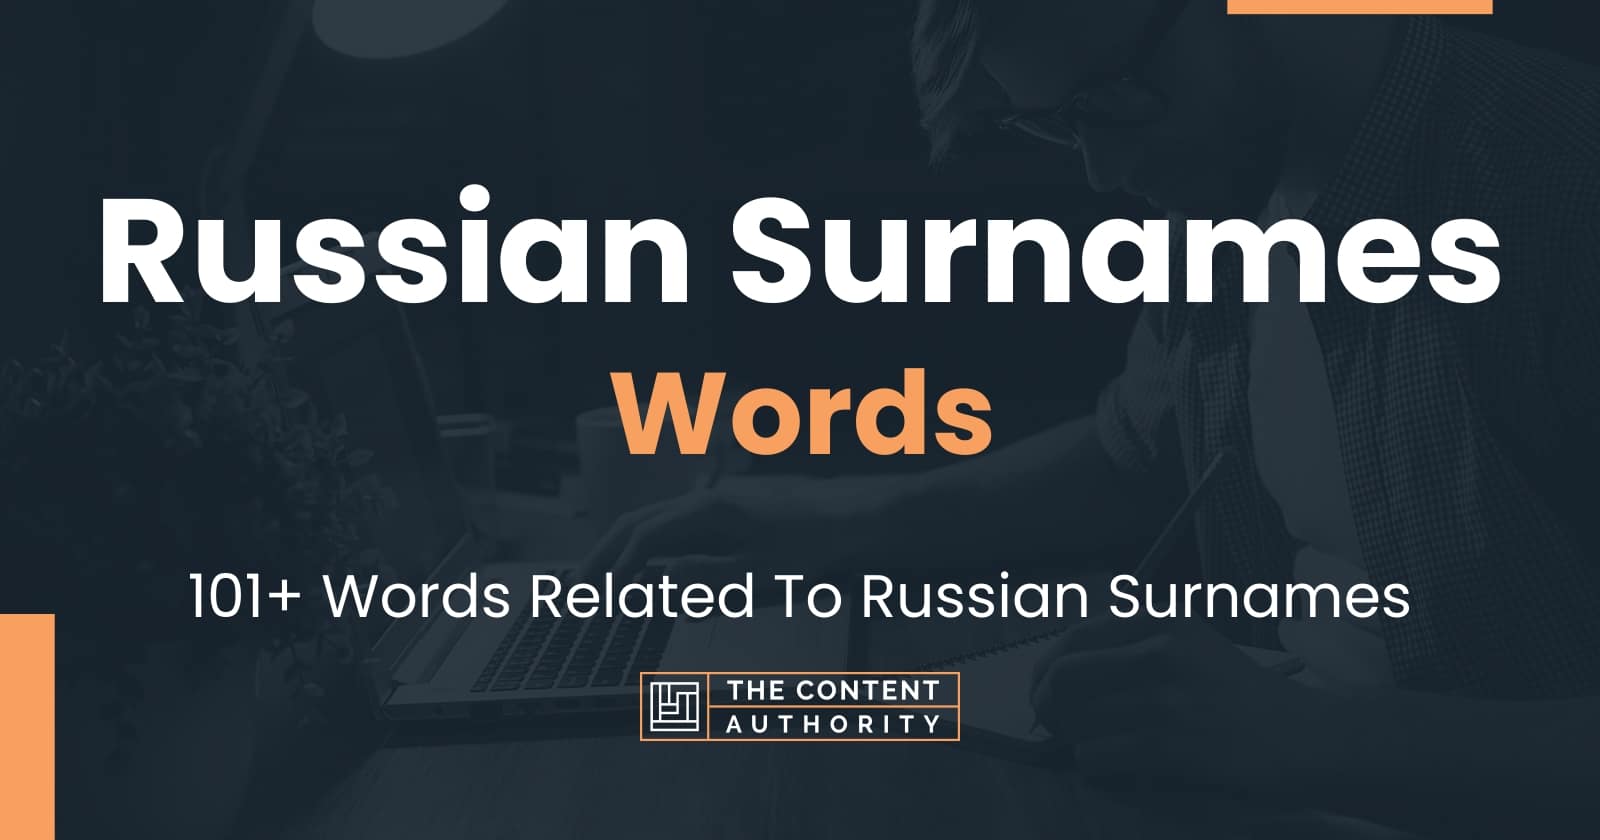 Russian Surnames Words 101 Words Related To Russian Surnames 3742